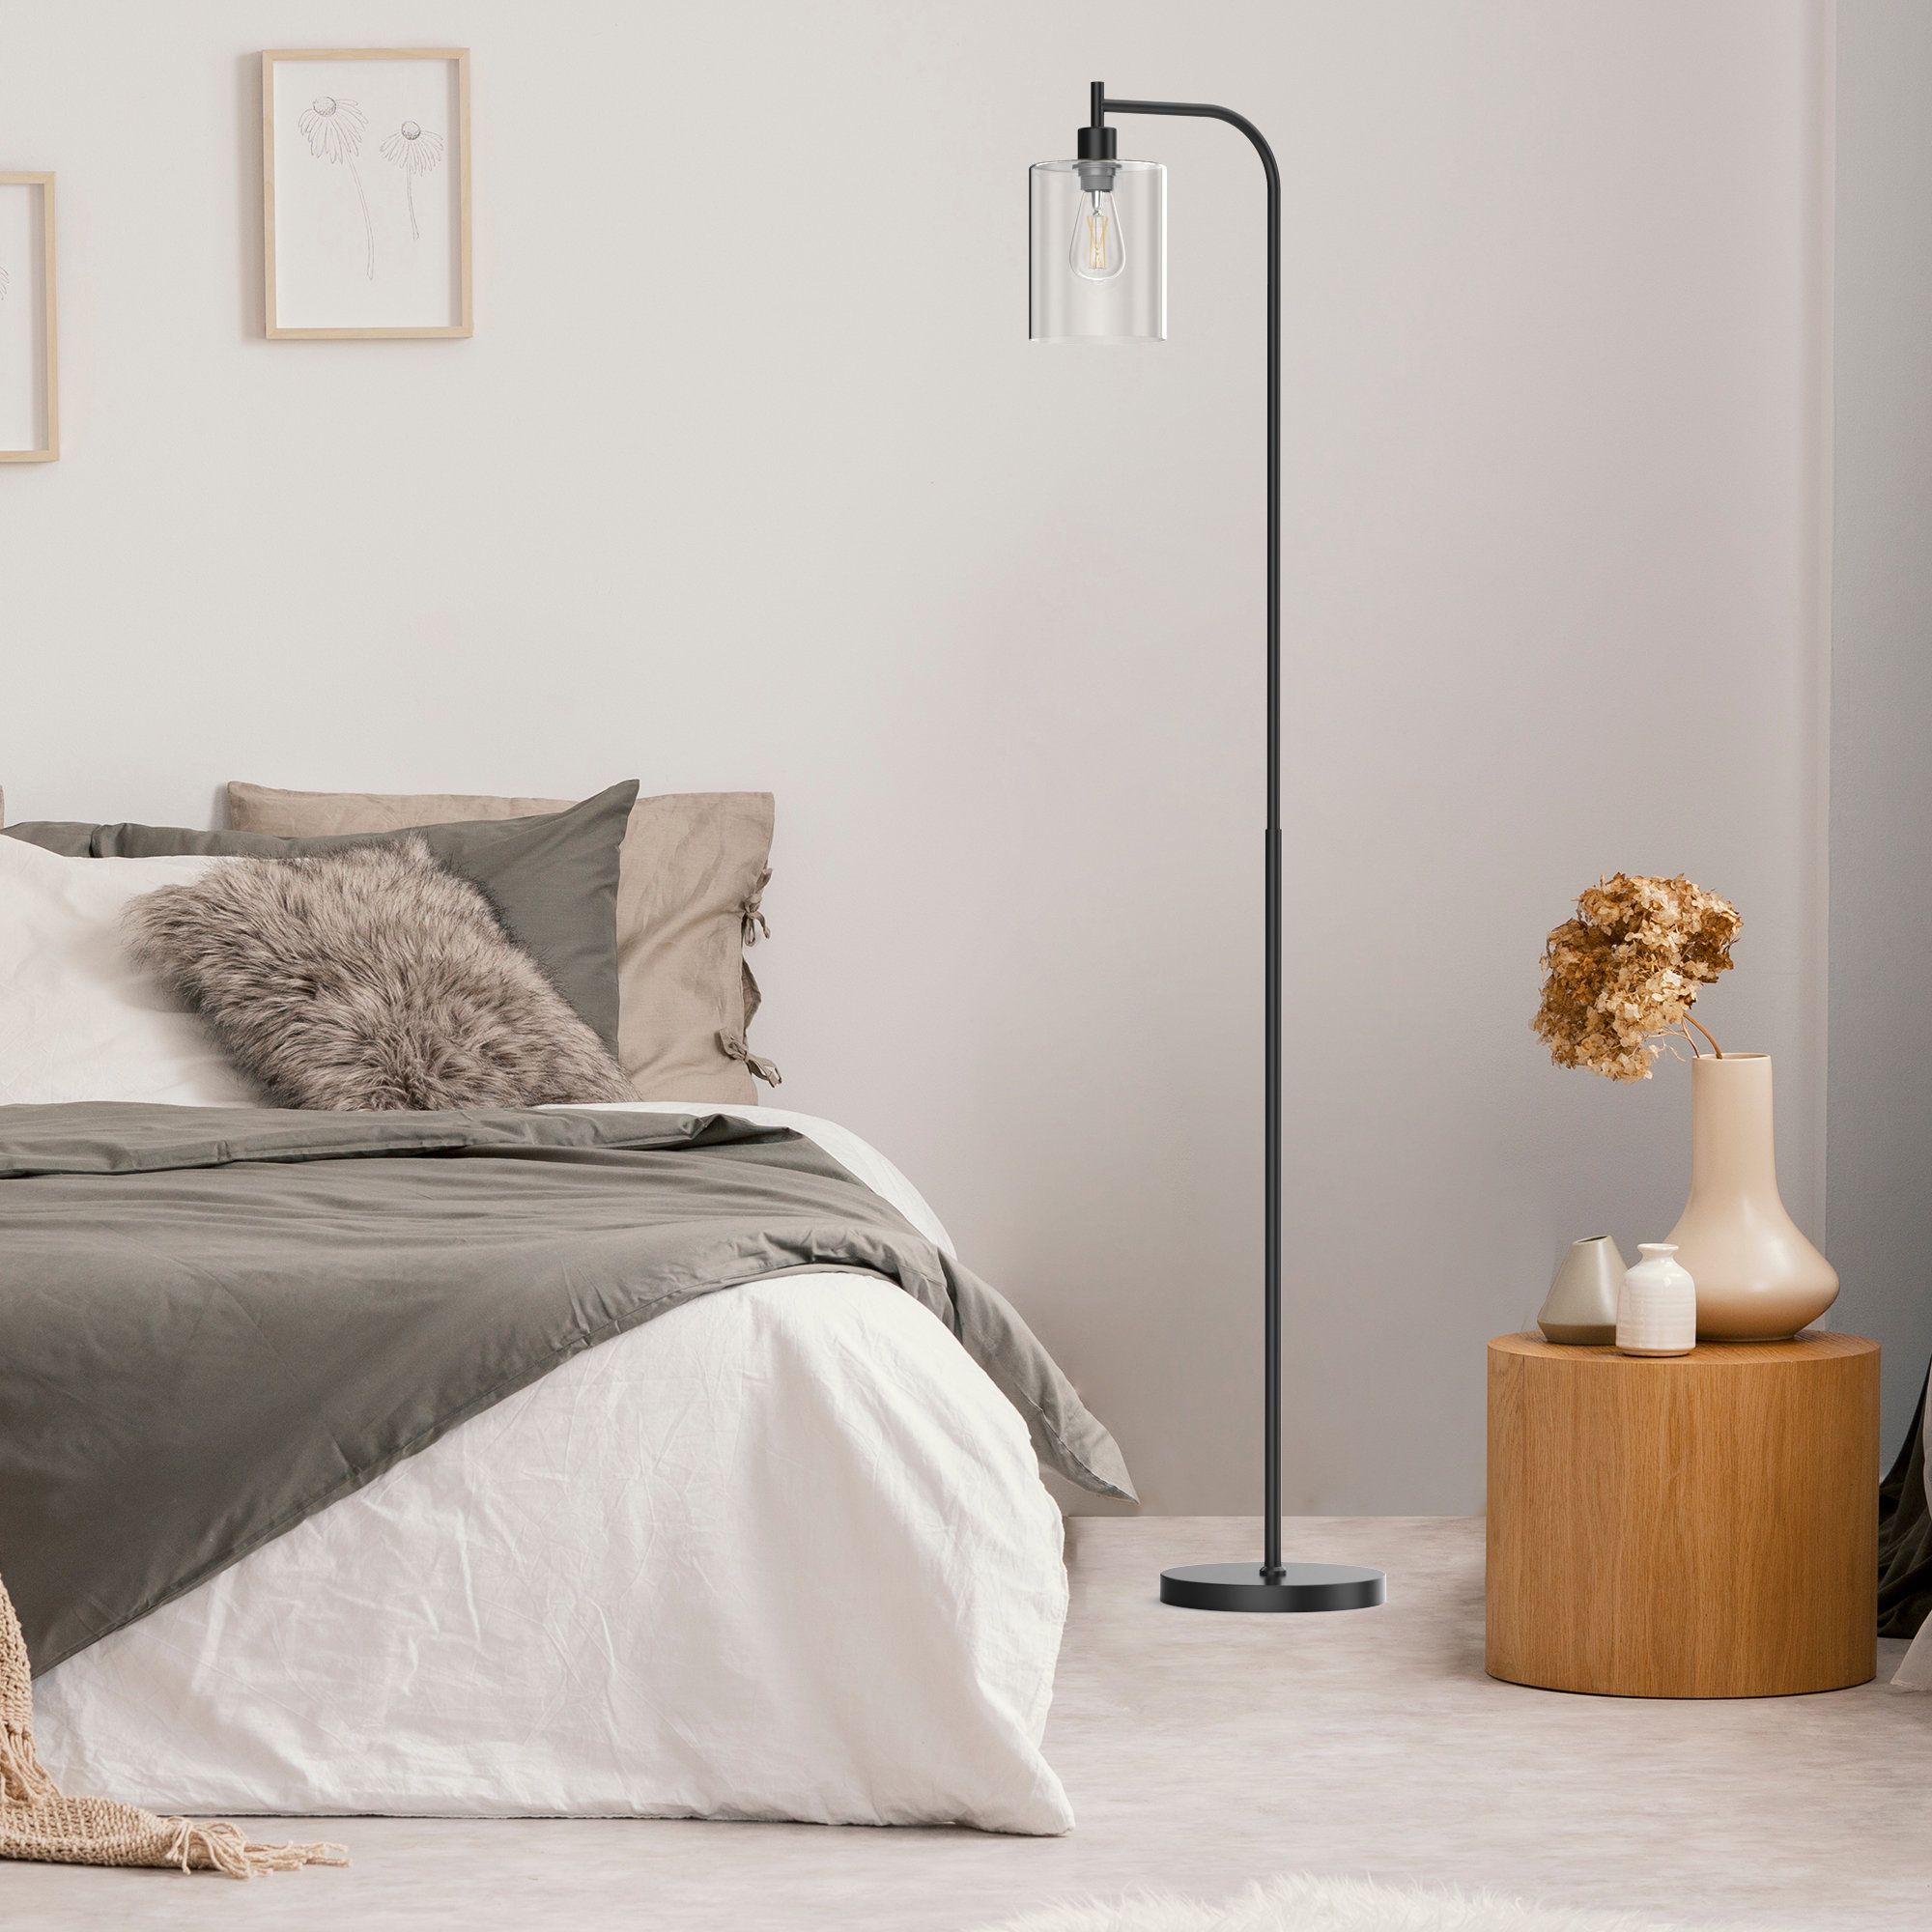 Pazzo Modern Standing Tall Industrial Arched/arc Floor Lamp With Glass  Shade And 2 Bulbs Included & Reviews | Wayfair For Industrial Floor Lamps (View 14 of 20)